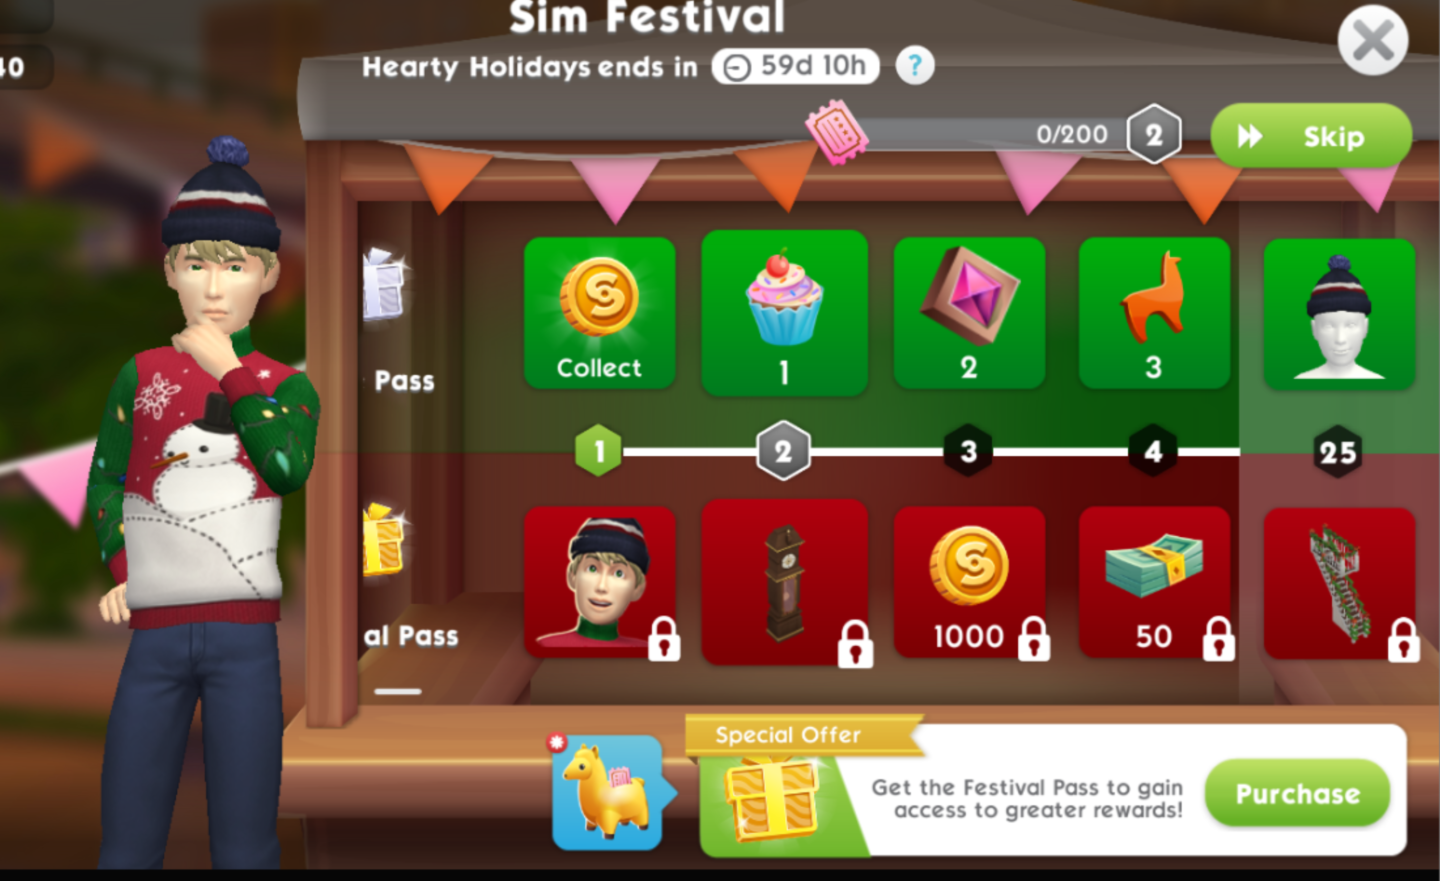 THE SIMS MOBILE HEARTY HOLIDAYS SIM FESTIVAL PRIZE TRACK